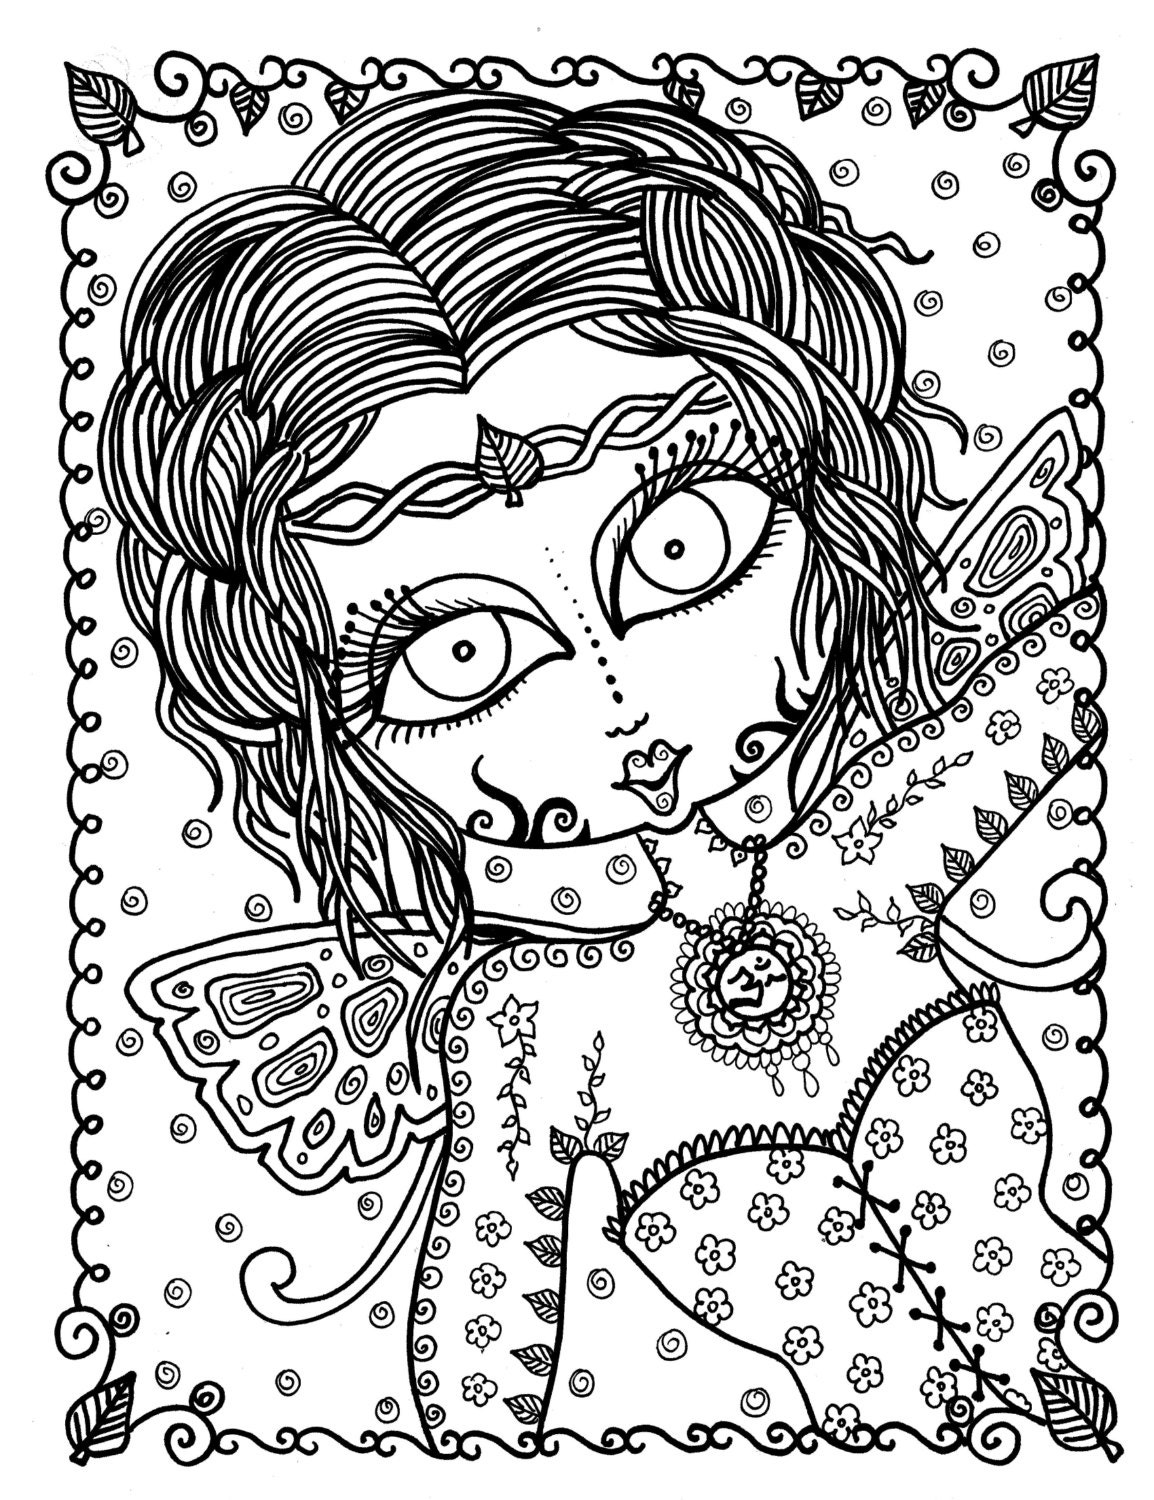 5 Pages Fairies Digital Downloads Instant Coloring Pages, Fairy Hair,  Fairy, Adult Color Book -  Norway